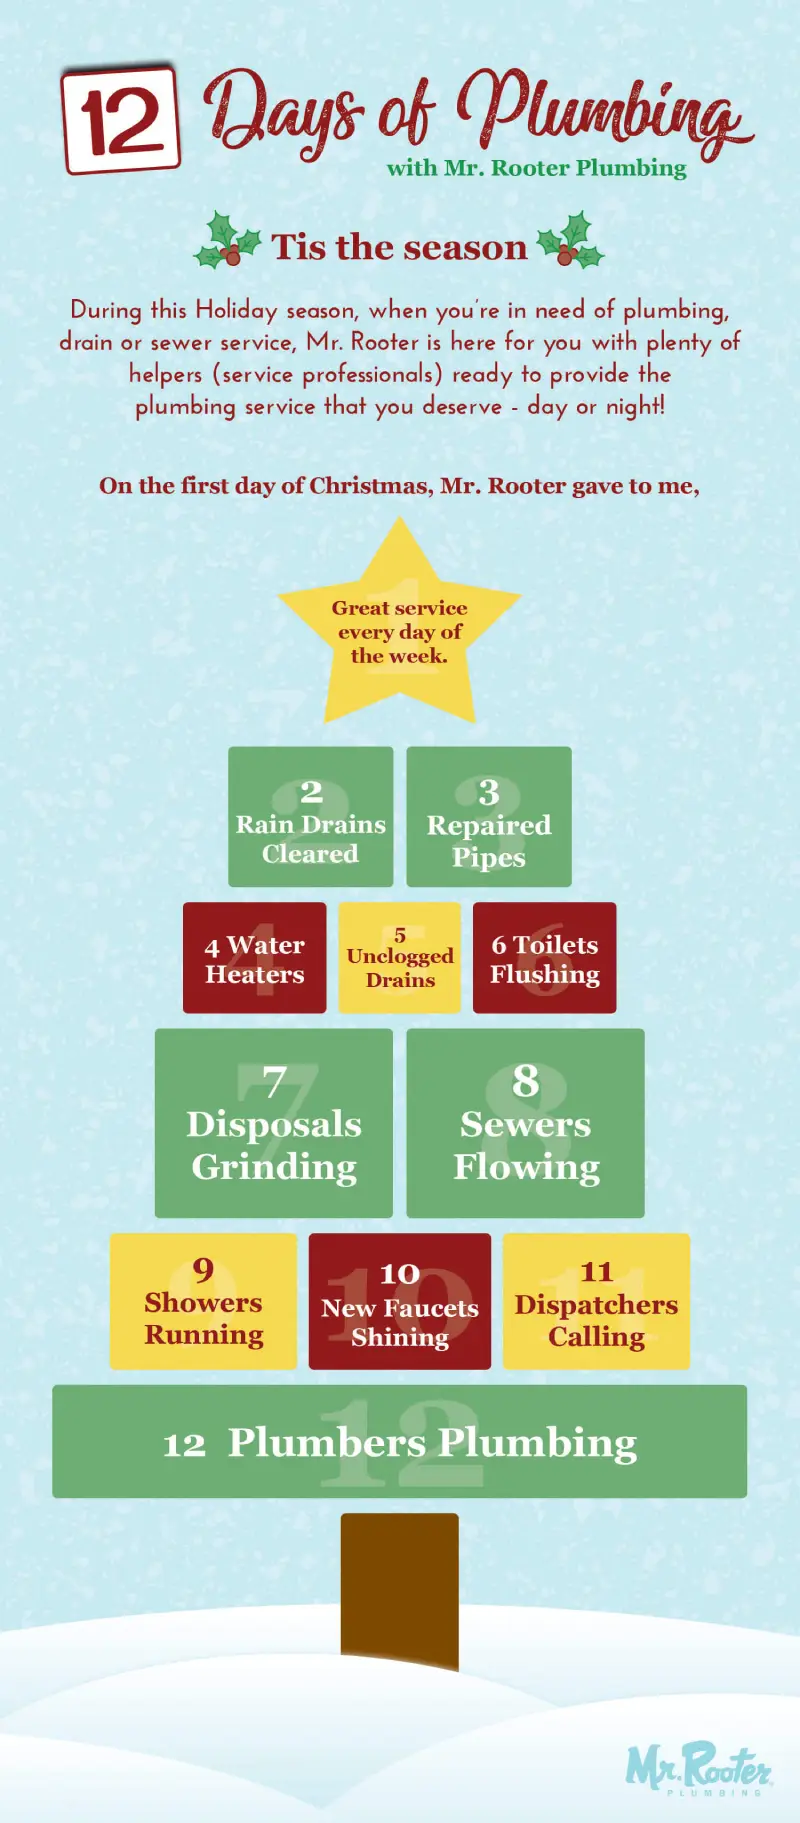 12 Days of Plumbing with Mr. Rooter Plumbing infographic